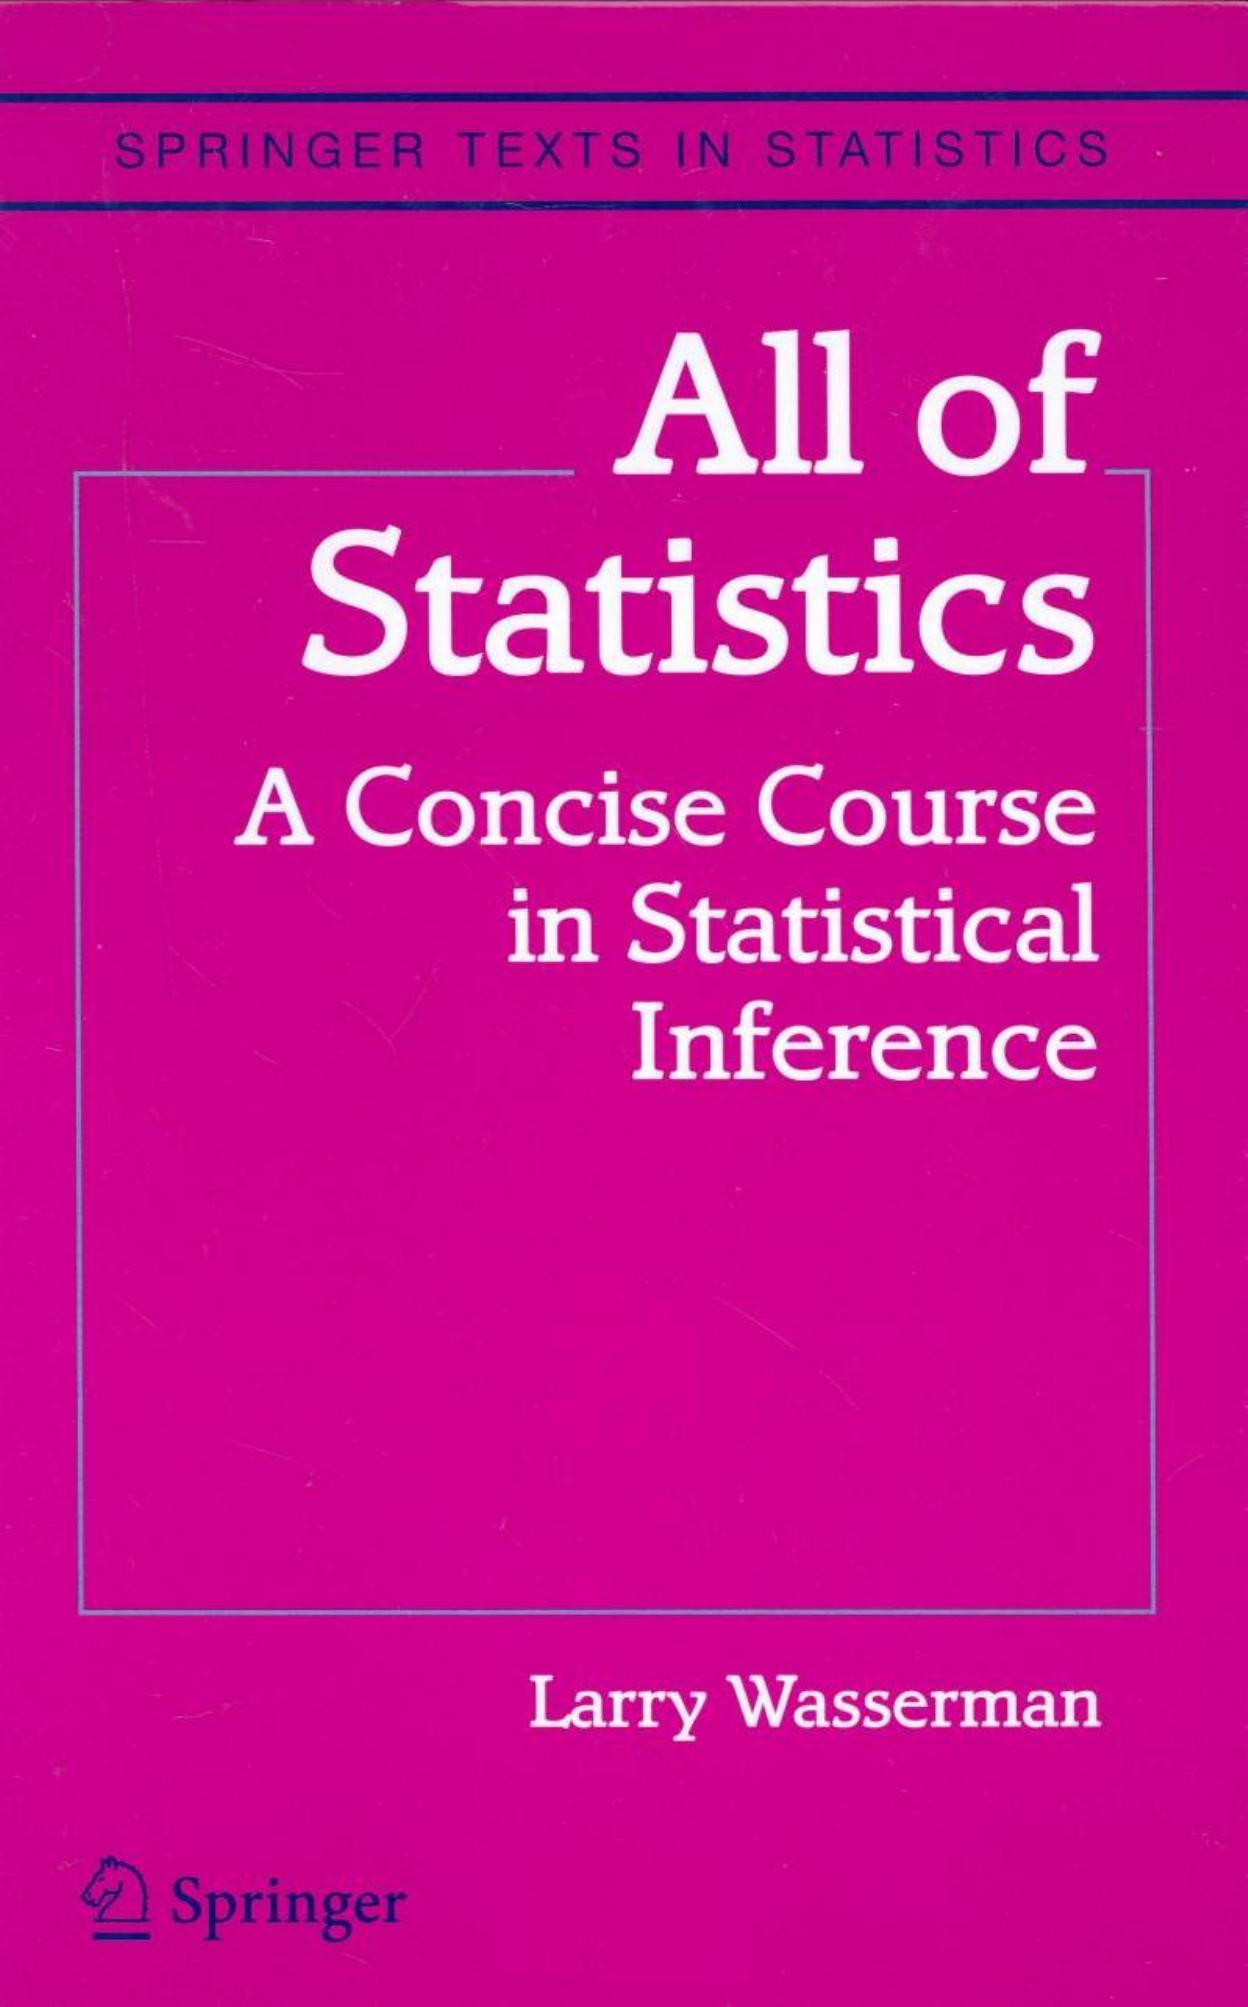 All of Statistics: A Concise Course in Statistical Inference [draft] (Springer Texts in Statistics)